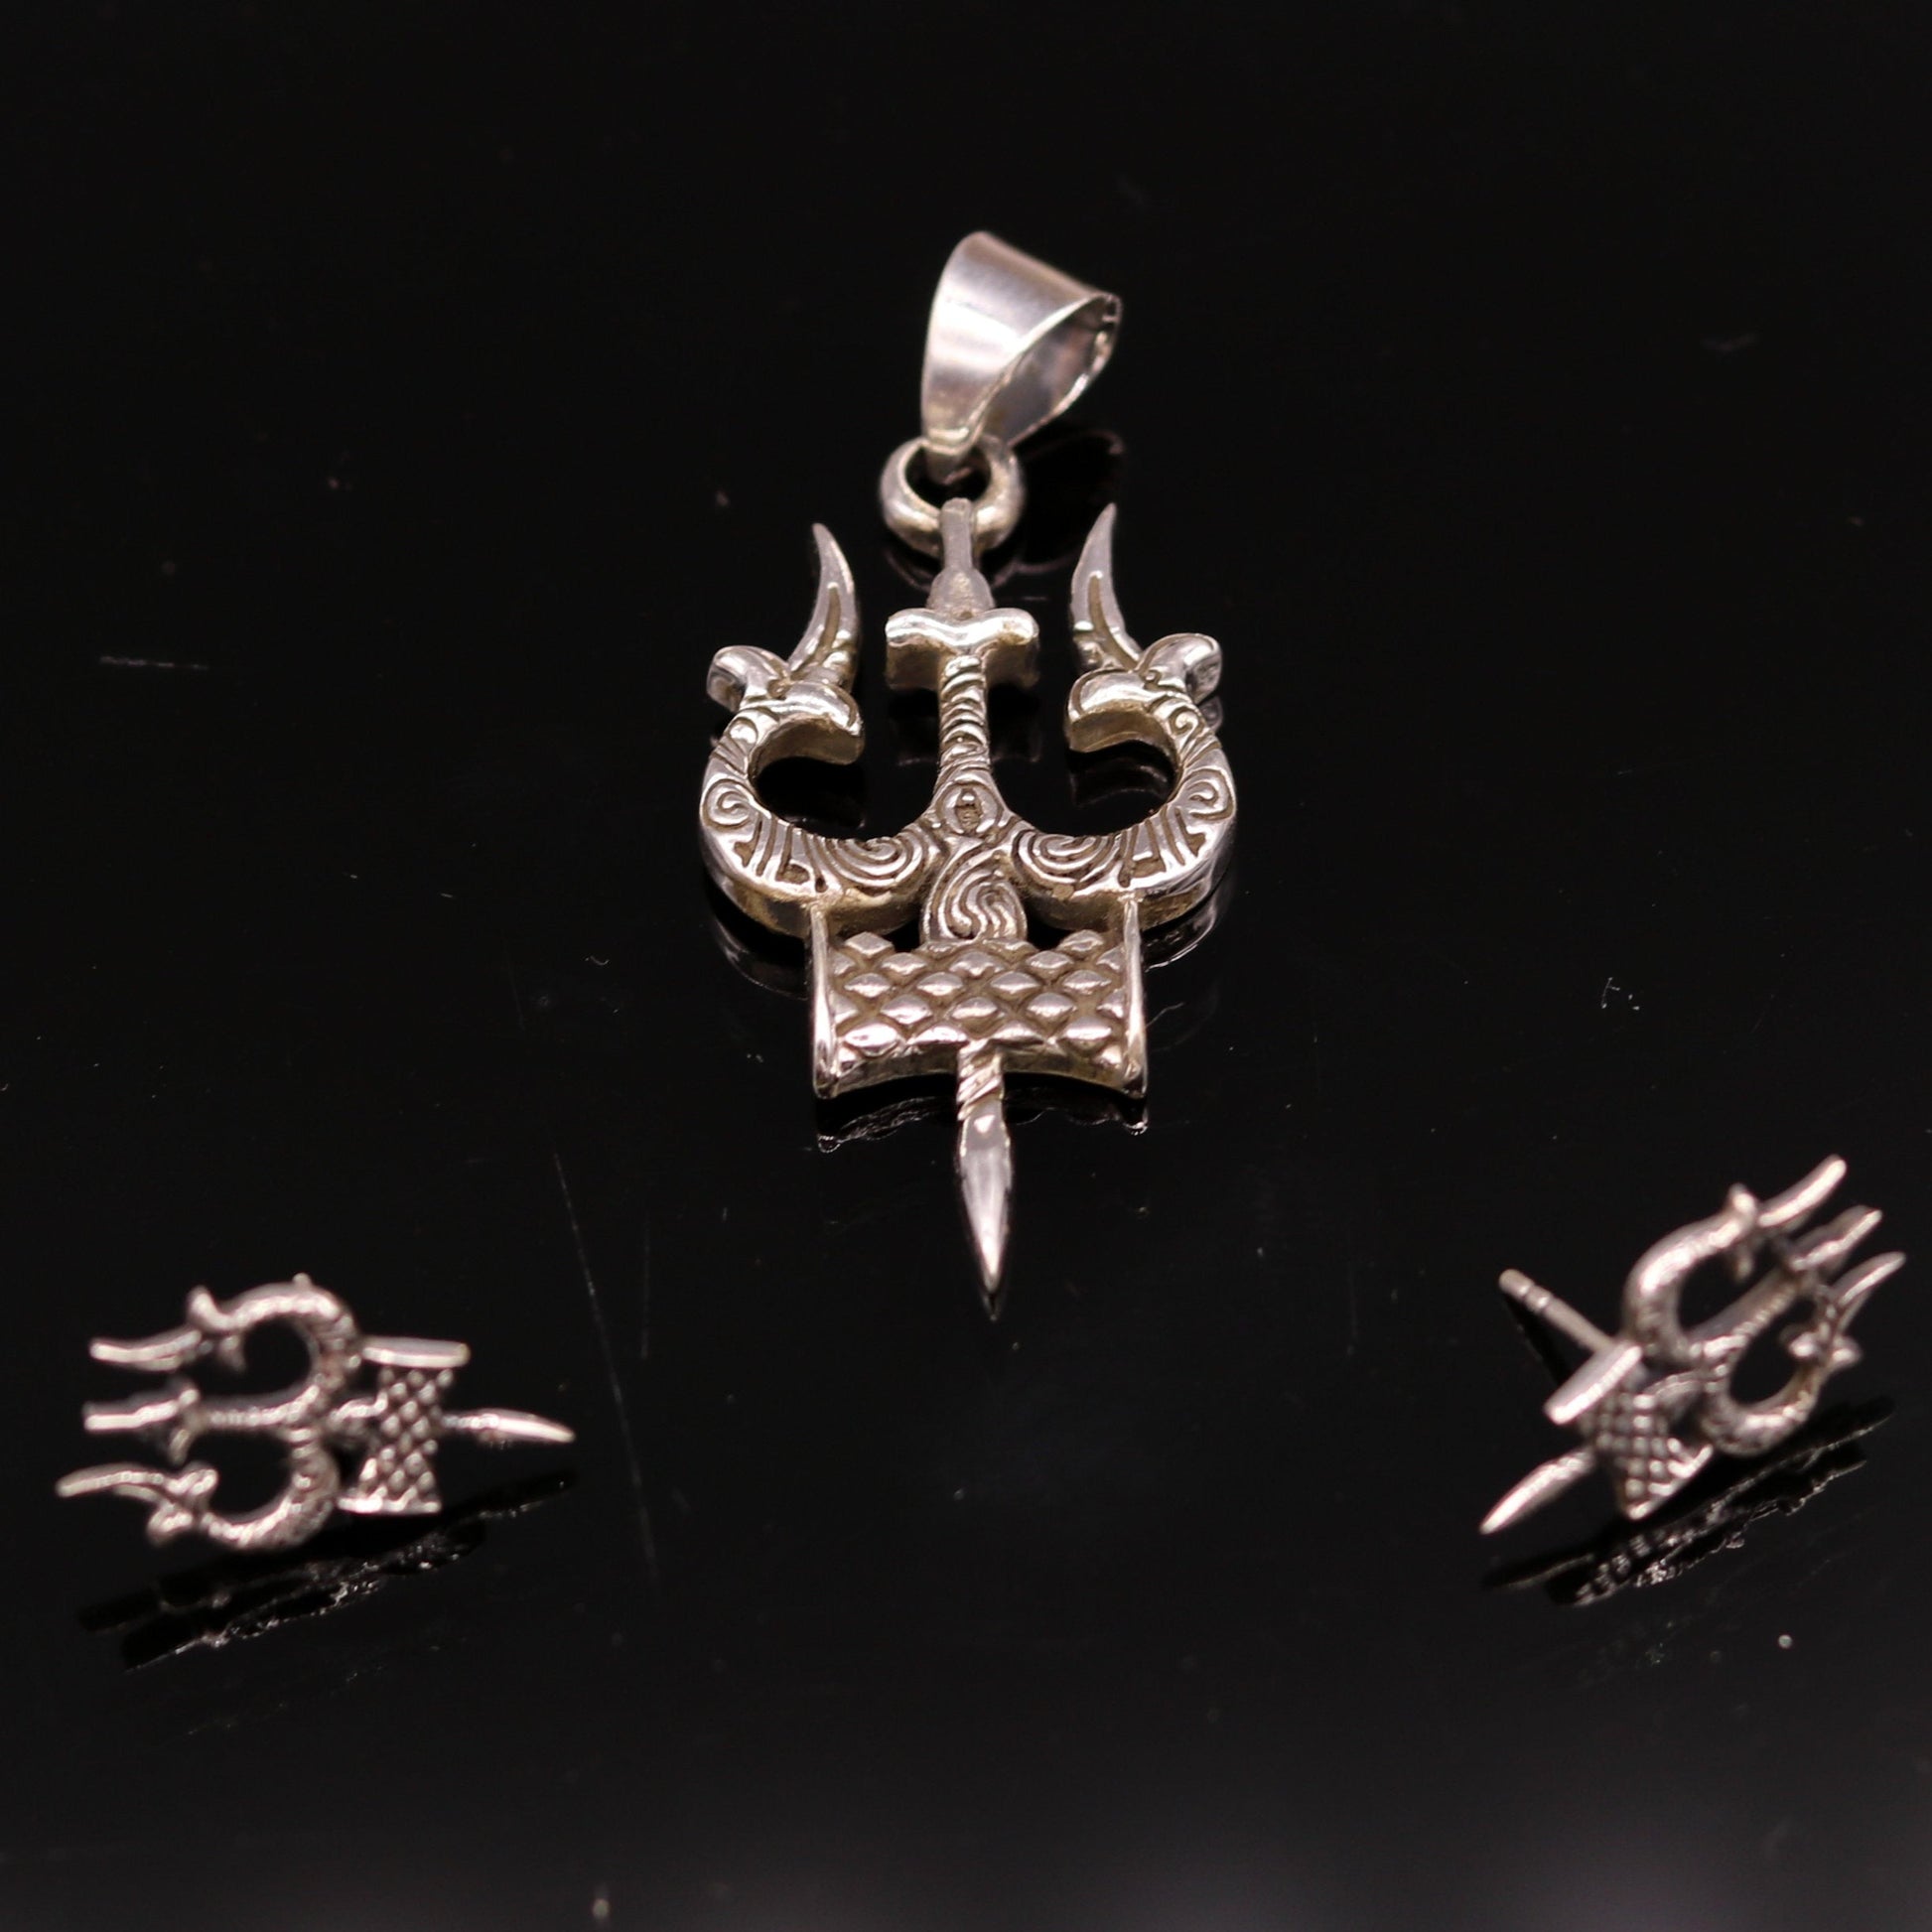 Awesome pretty design Lord Shiva trident shape pendant with tiny trident stud 925 sterling silver amazing fabulous set tribal jewelry nsp231 - TRIBAL ORNAMENTS